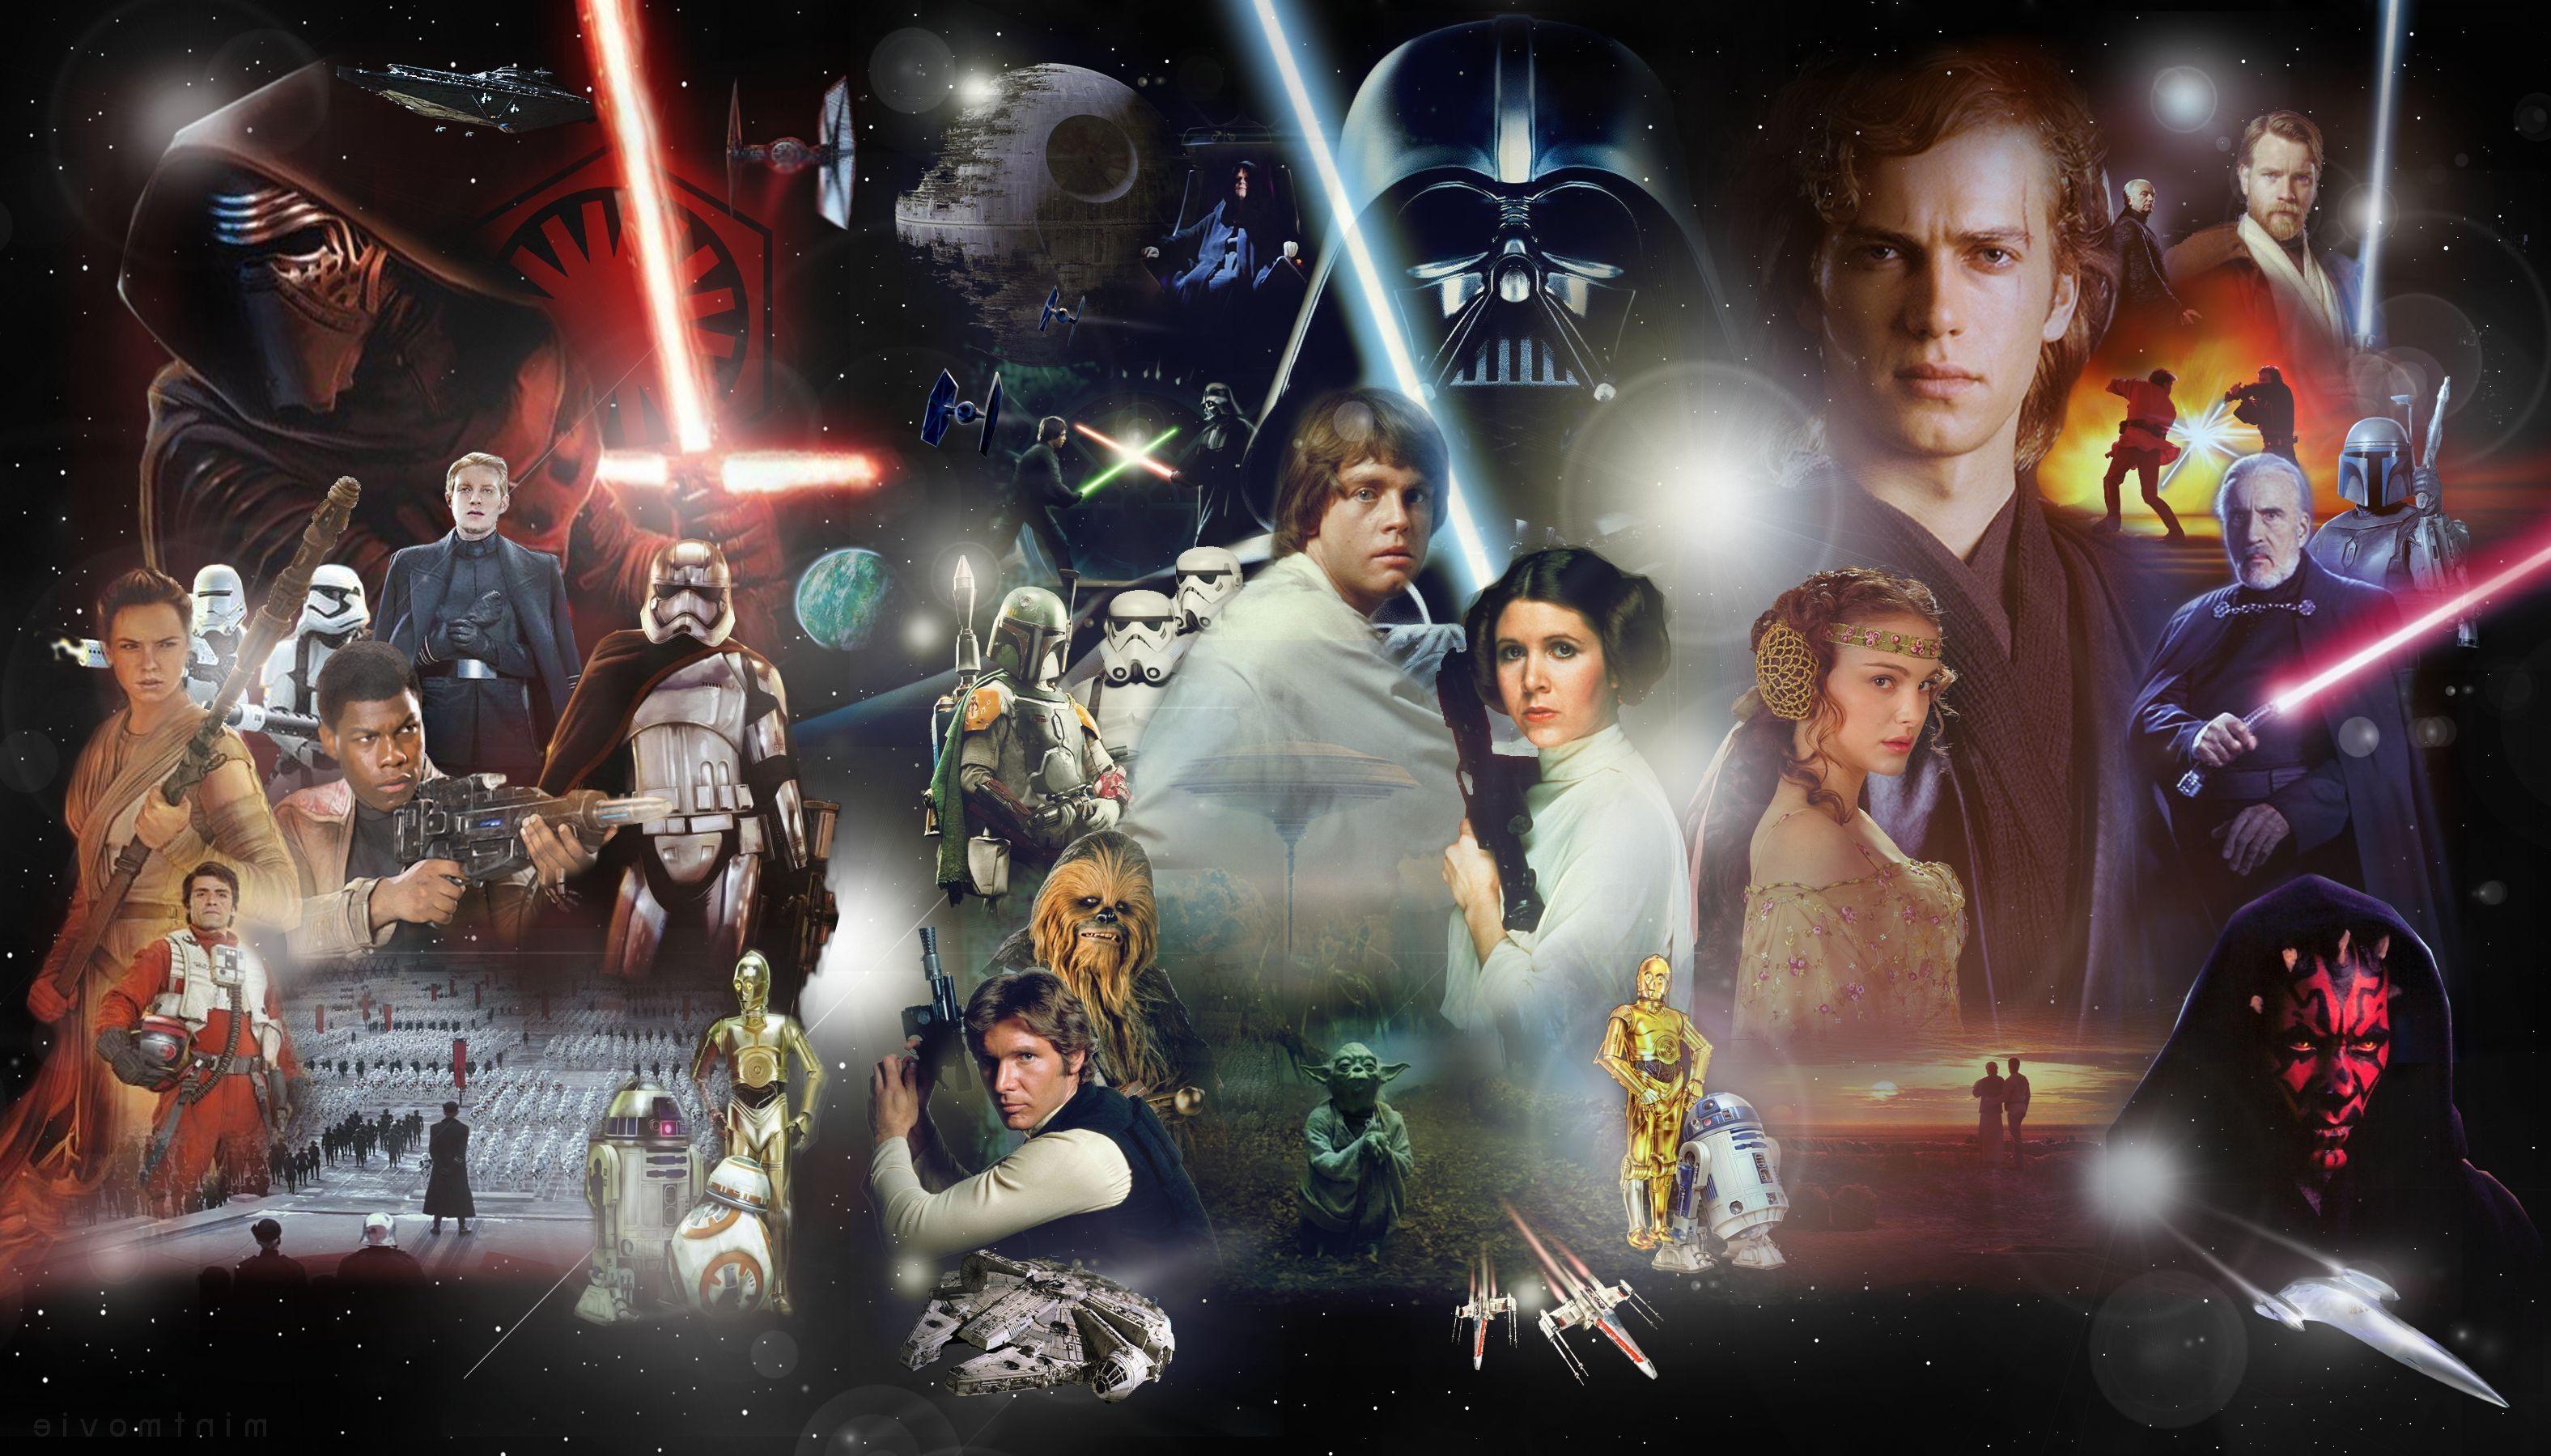 Star Wars Trilogy Wallpapers - Wallpaper Cave Star Wars Star Background